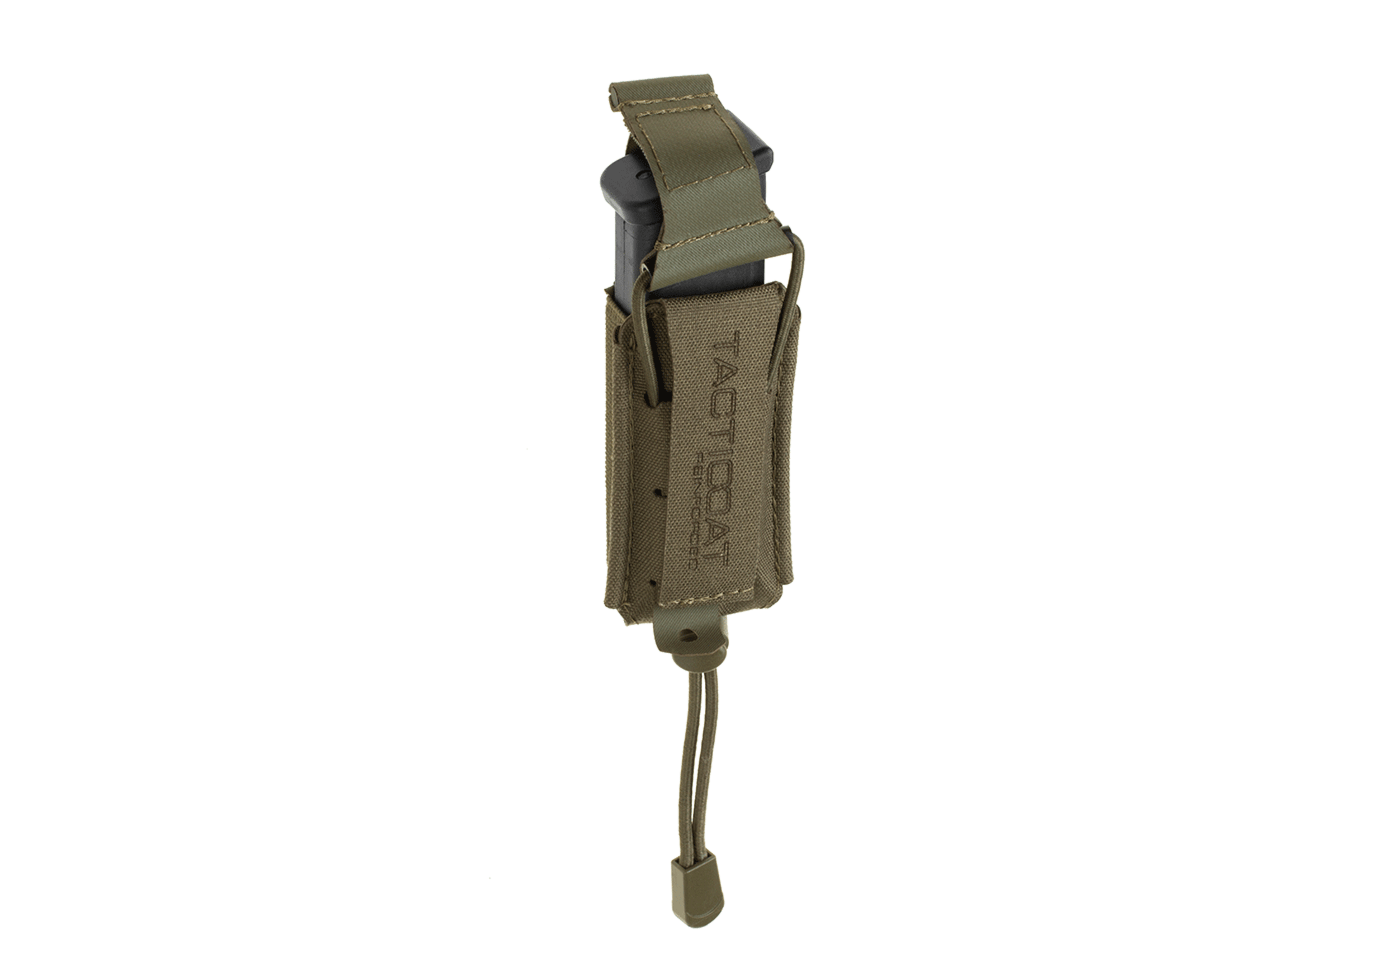 Claw Gear 9mm Backward Flap Mag Pouch Ral 7013 - ContractorHouse